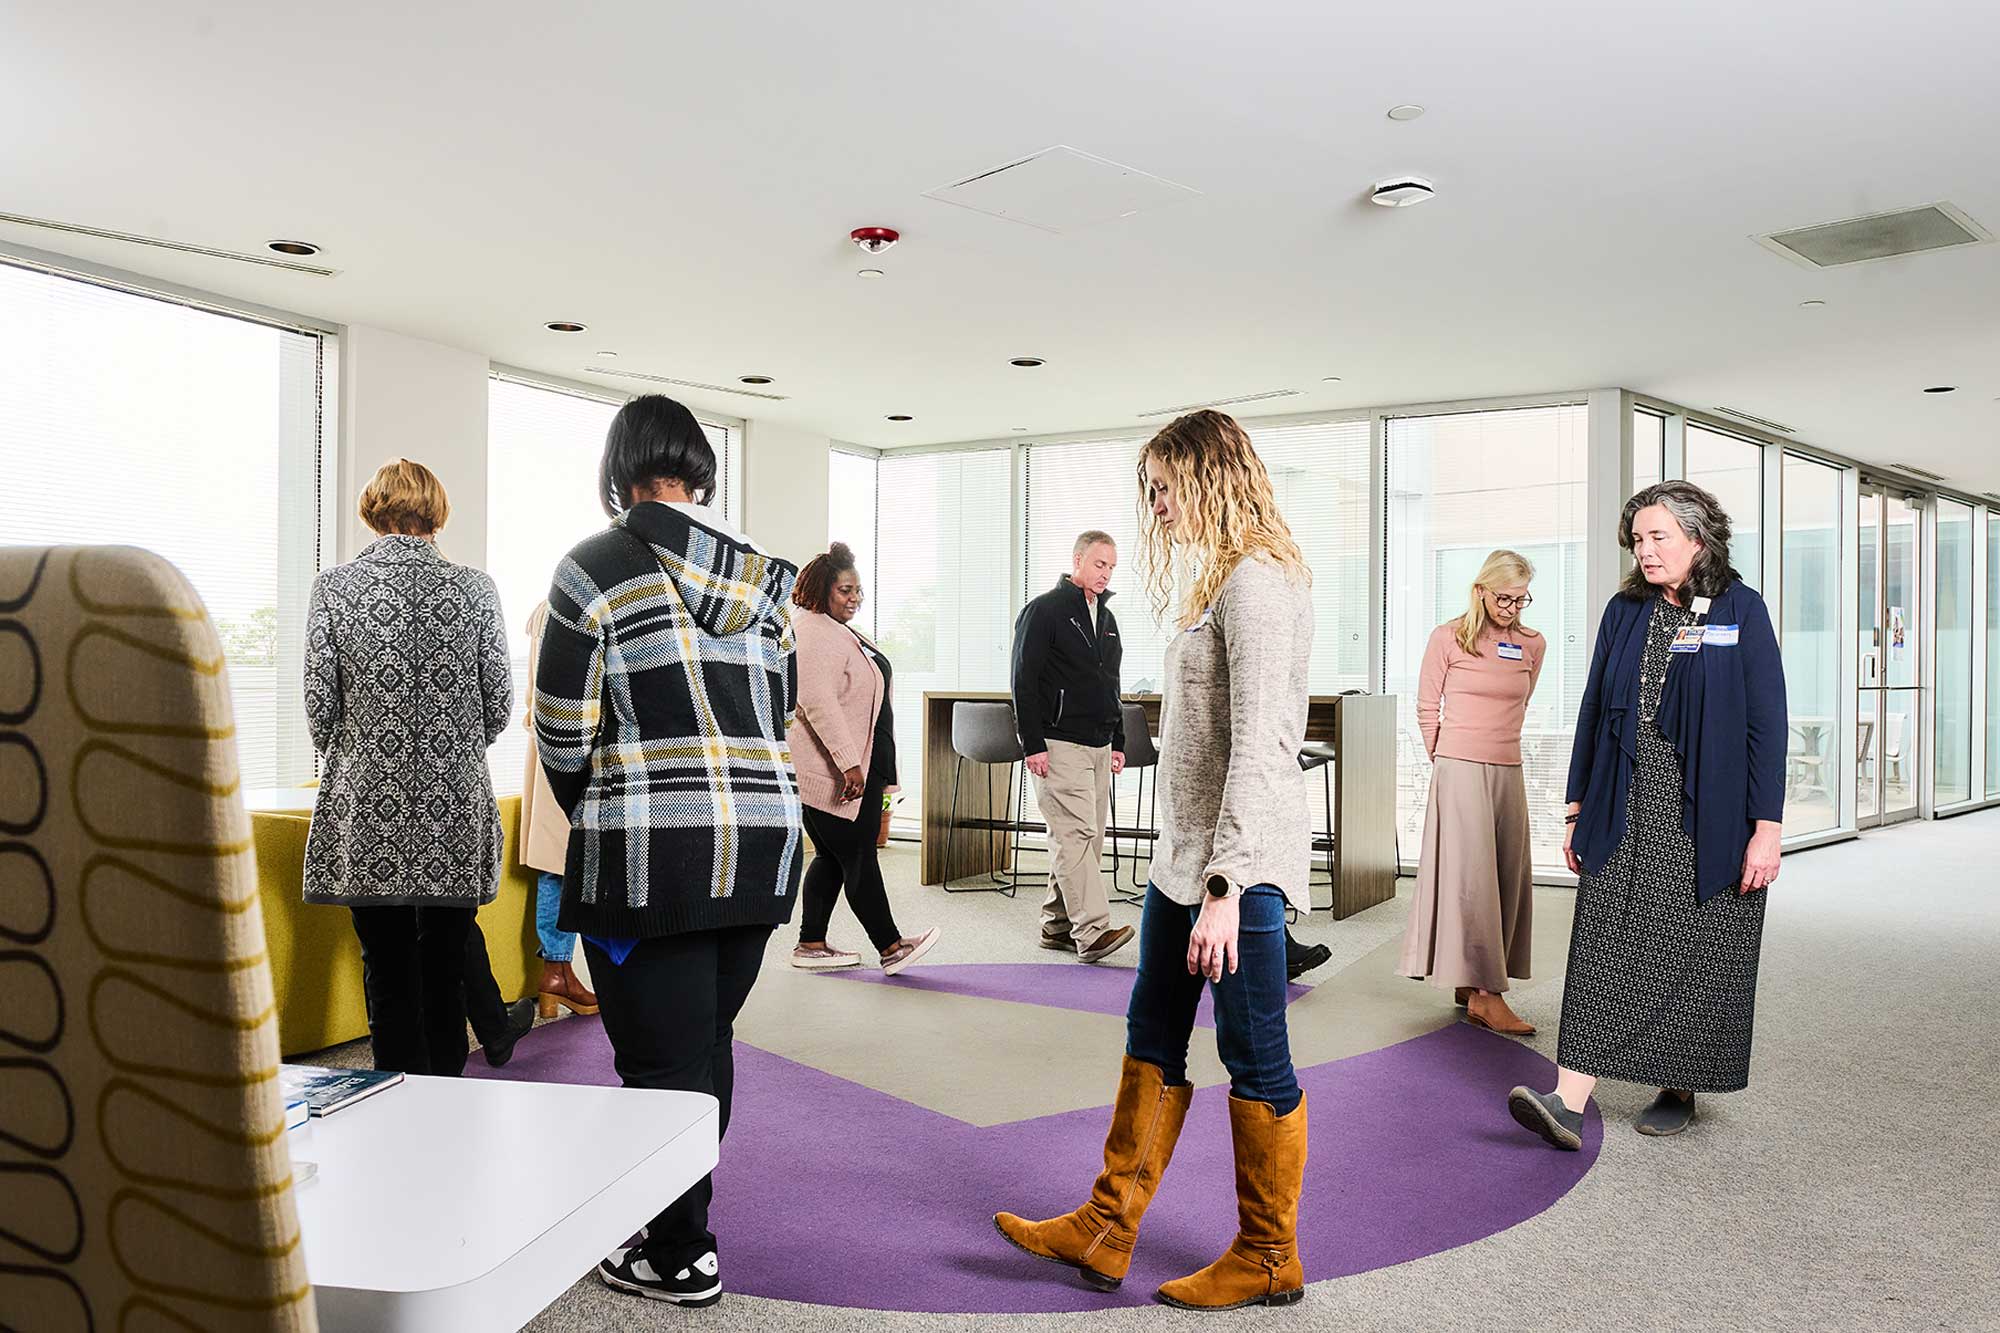 Participants walking in a circle in an open interior space with large windows and purple and gray carpeting